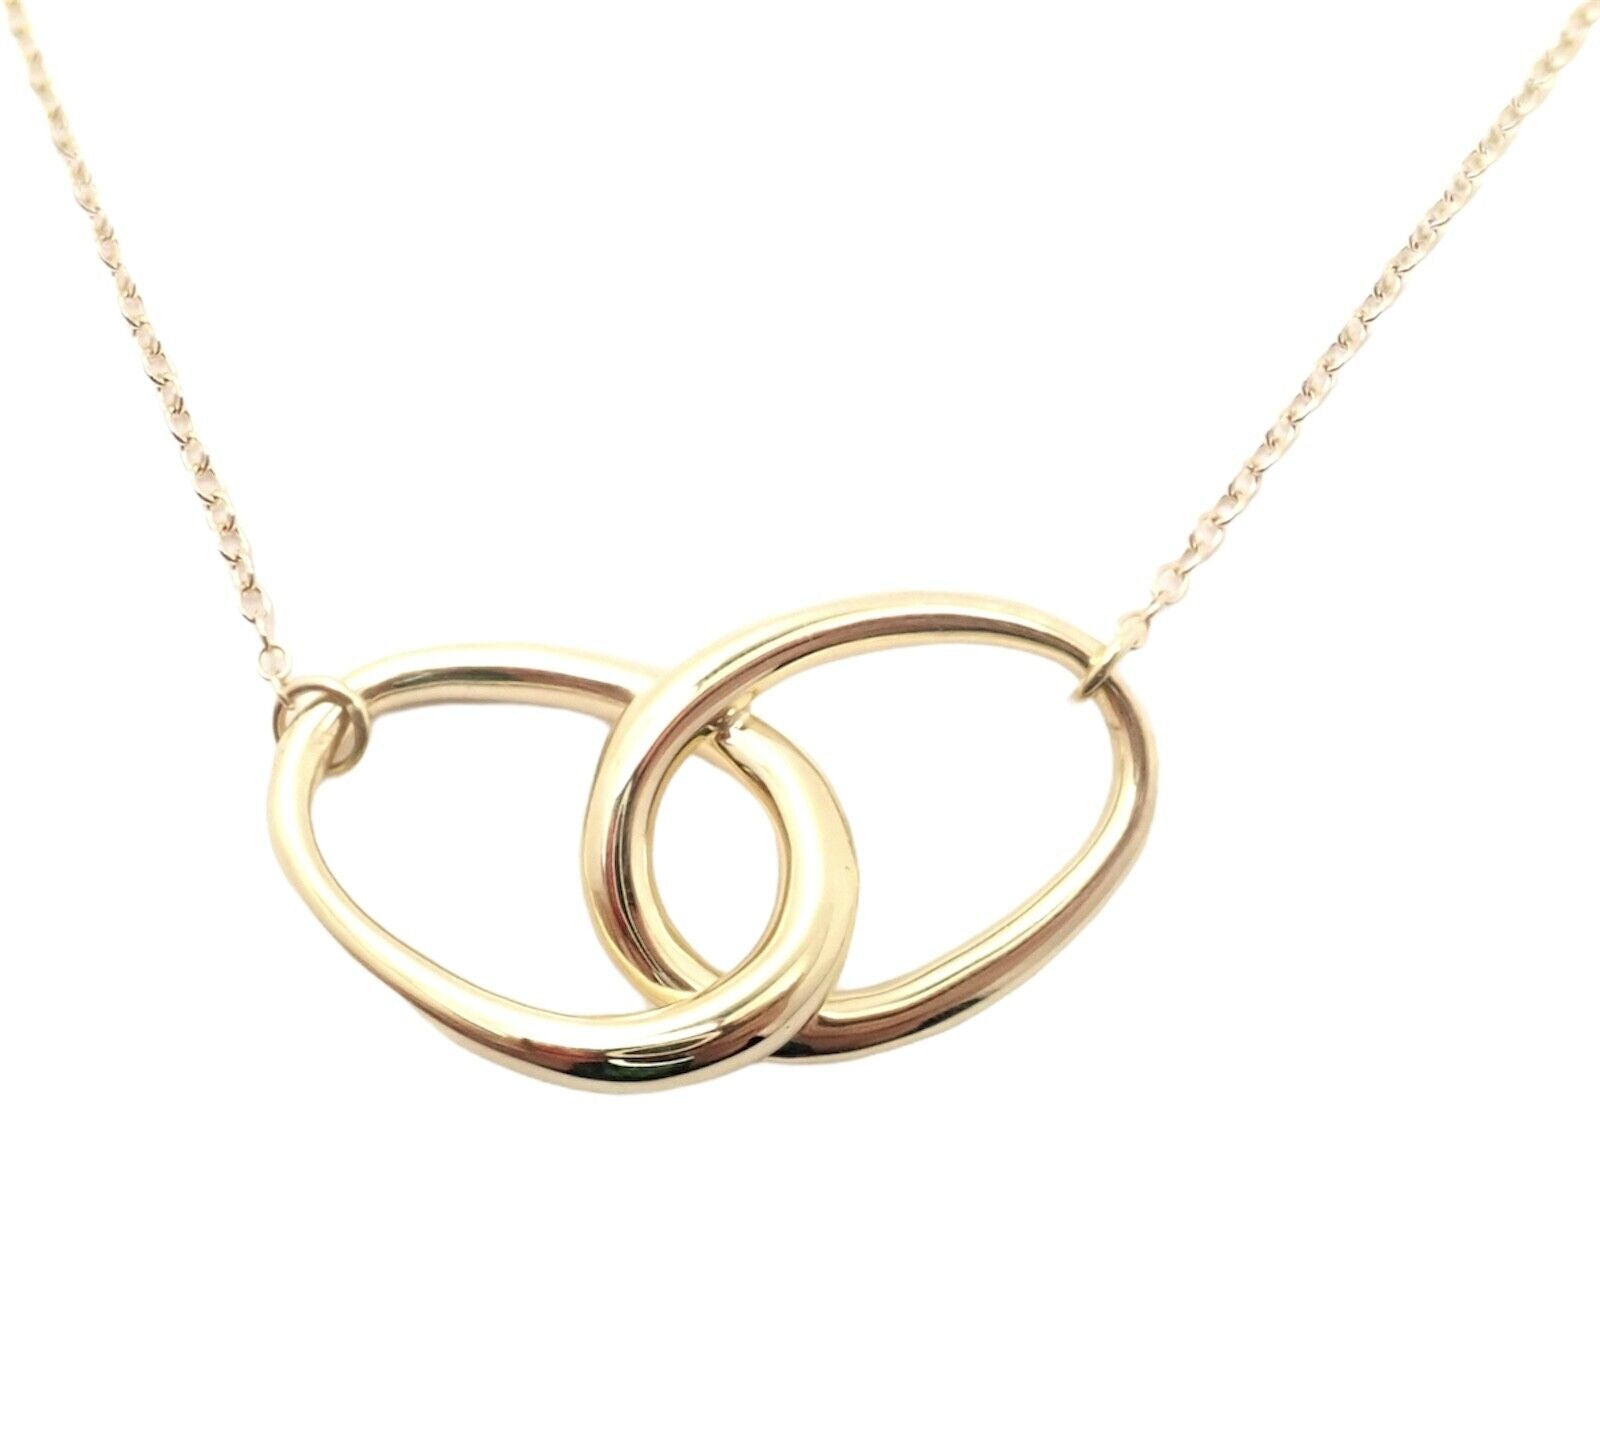 Tiffany & Co. Jewelry & Watches:Fine Jewelry:Necklaces & Pendants Authentic! Tiffany & Co Elsa Peretti 18k Yellow Gold Linked Oval Hugs Necklace